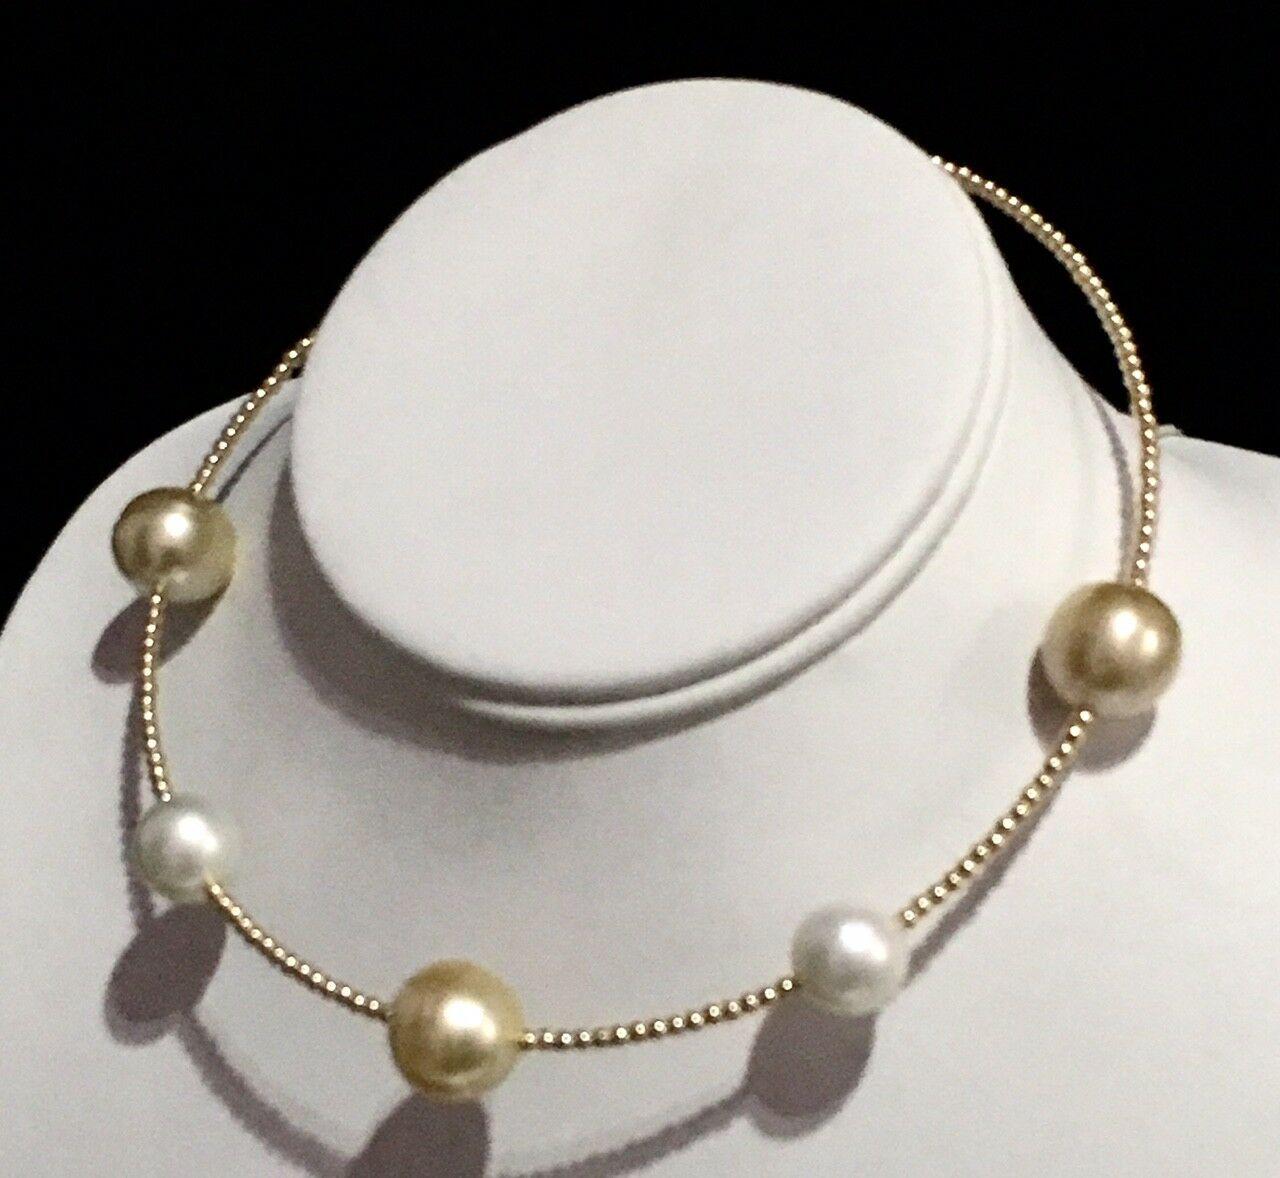 Women's Golden South Sea Pearl Necklace 14k Gold Italy Italy Certified